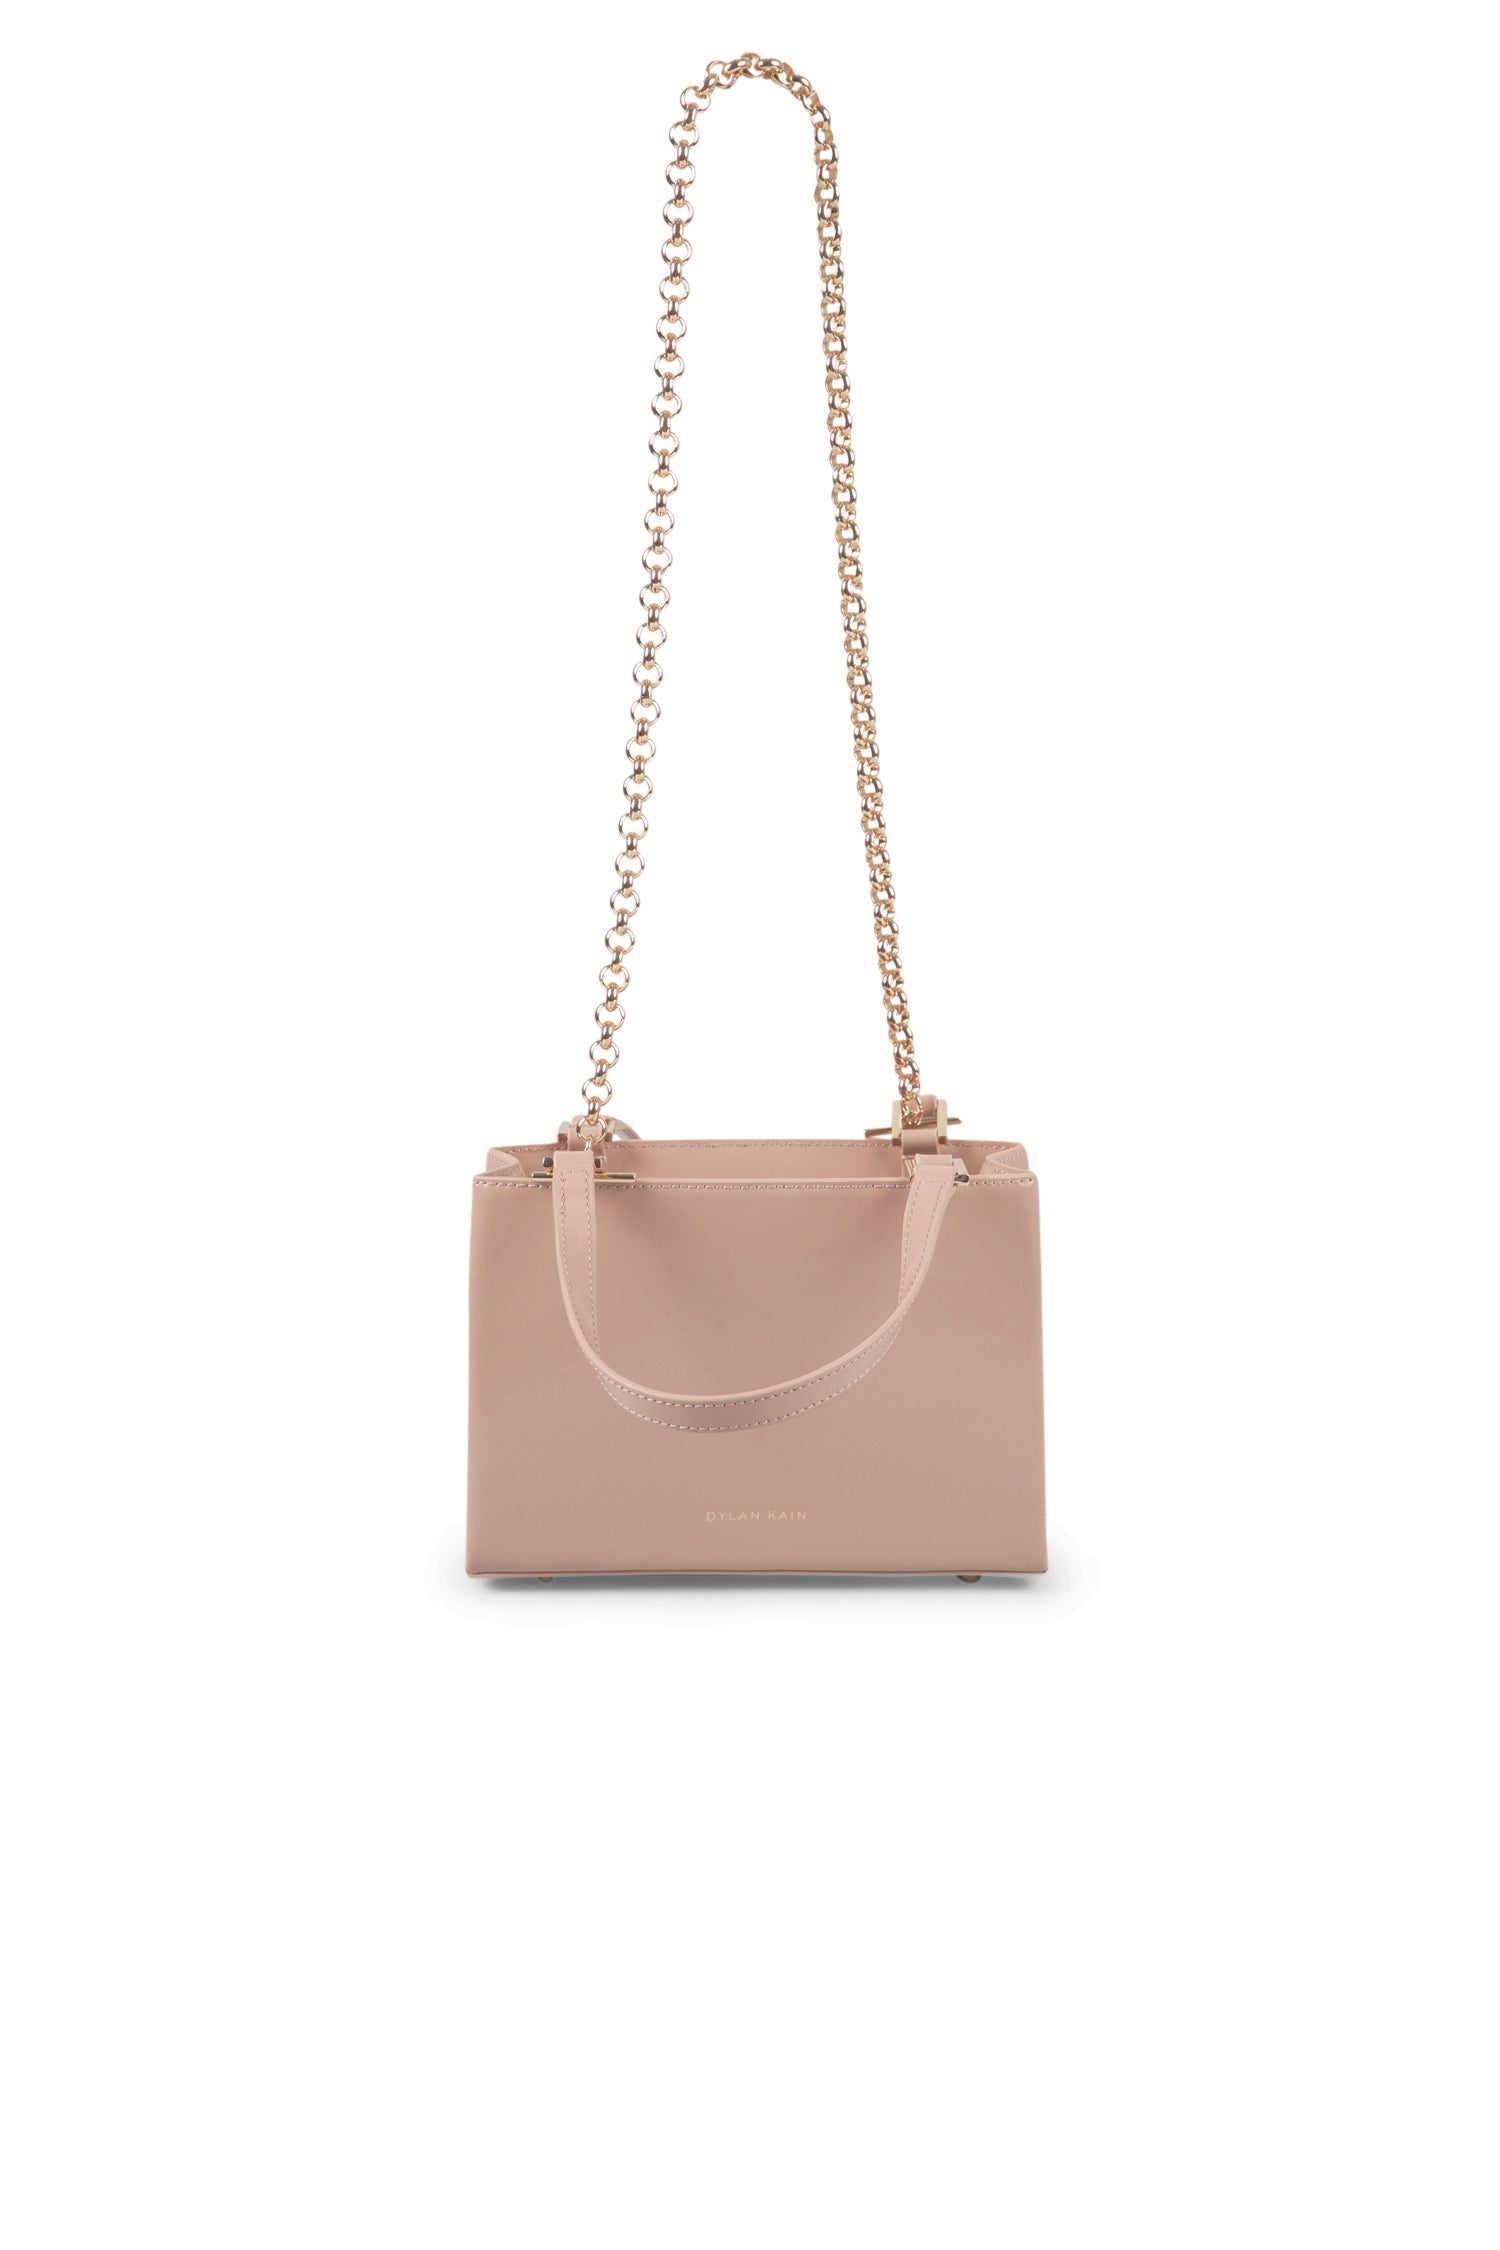 The Paltrow Patent Bag Fawn